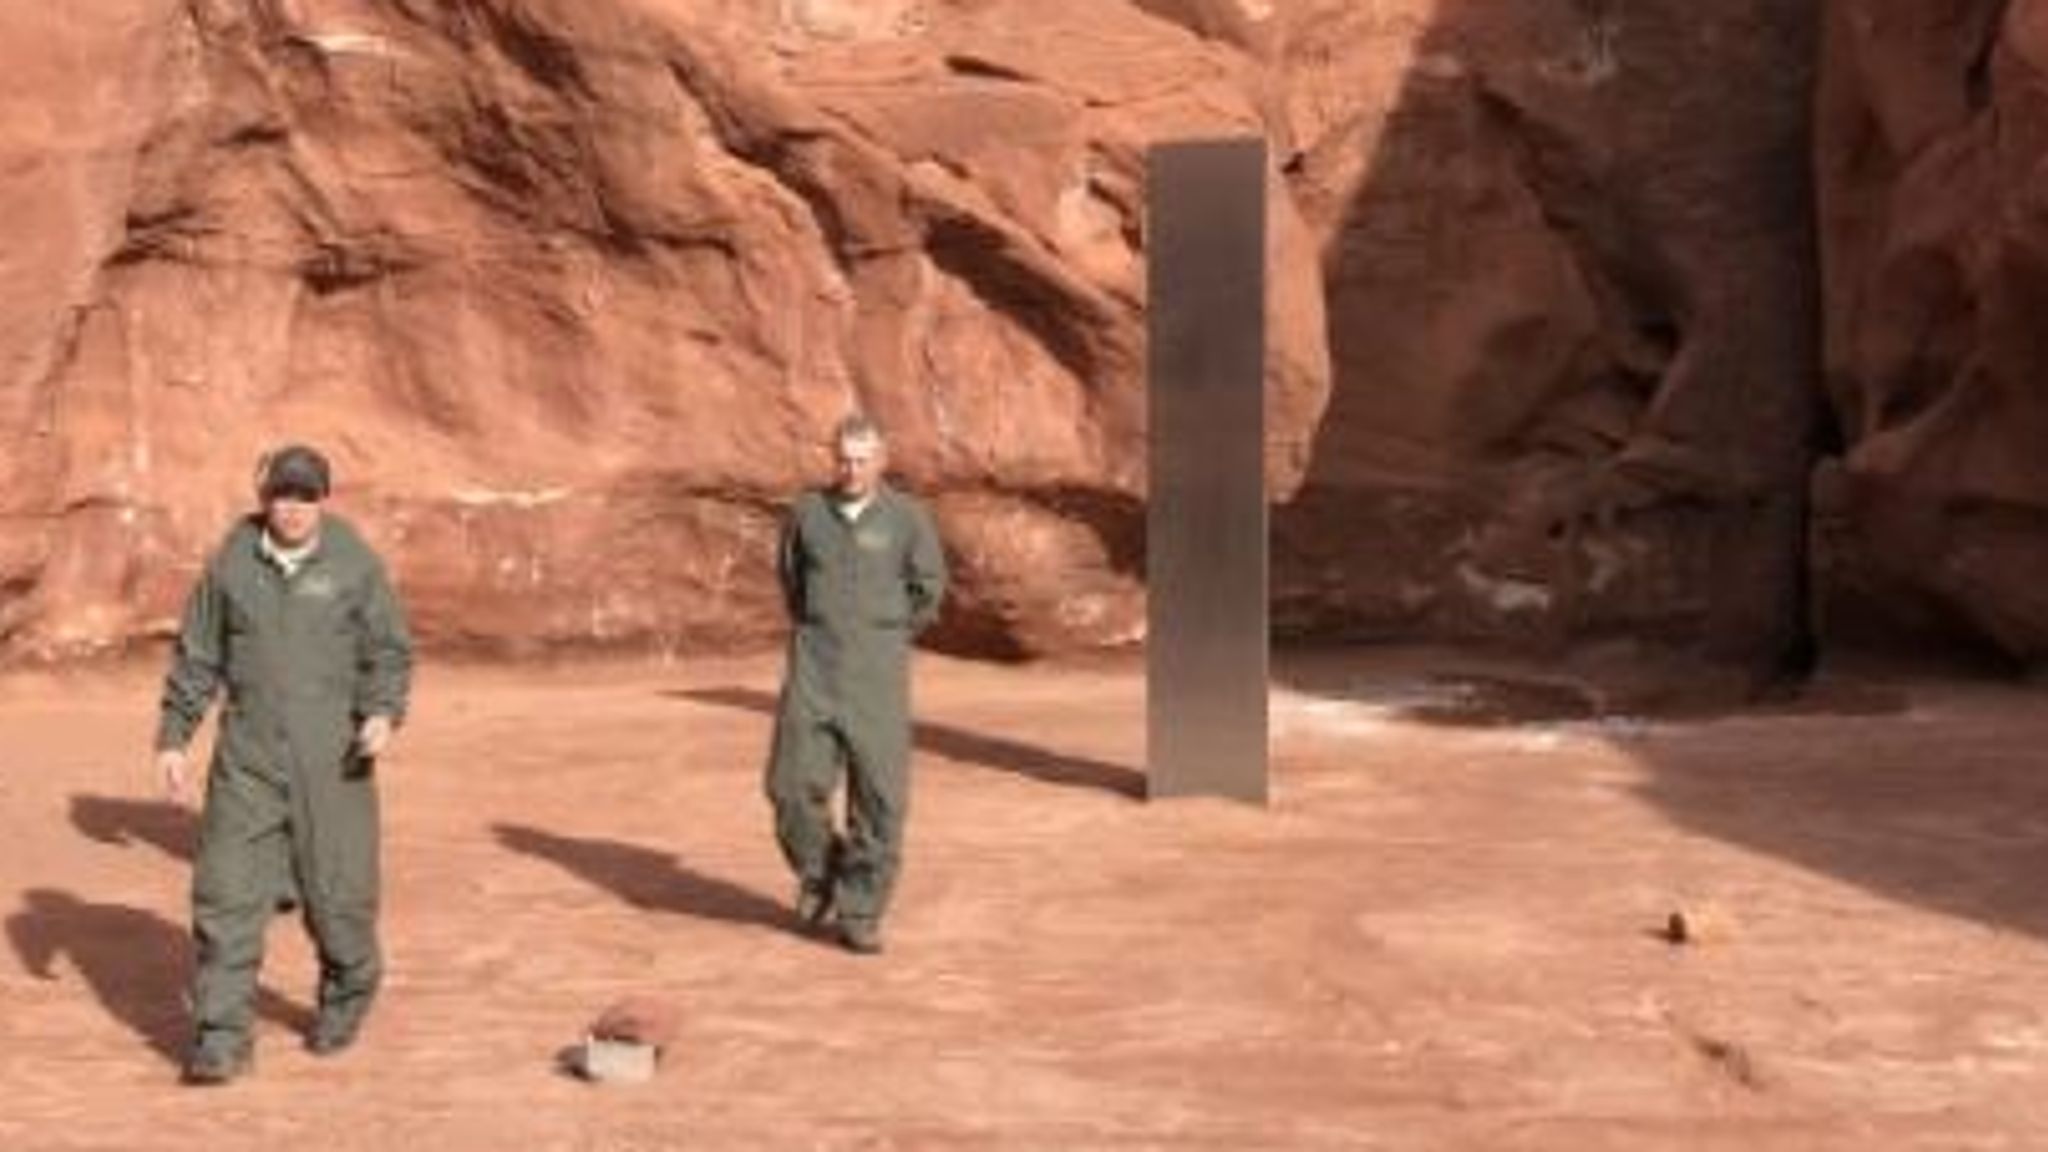 This Mysterious Metal Monolith Was Found In A Remote Part Of Utah And No One Knows How It Got There